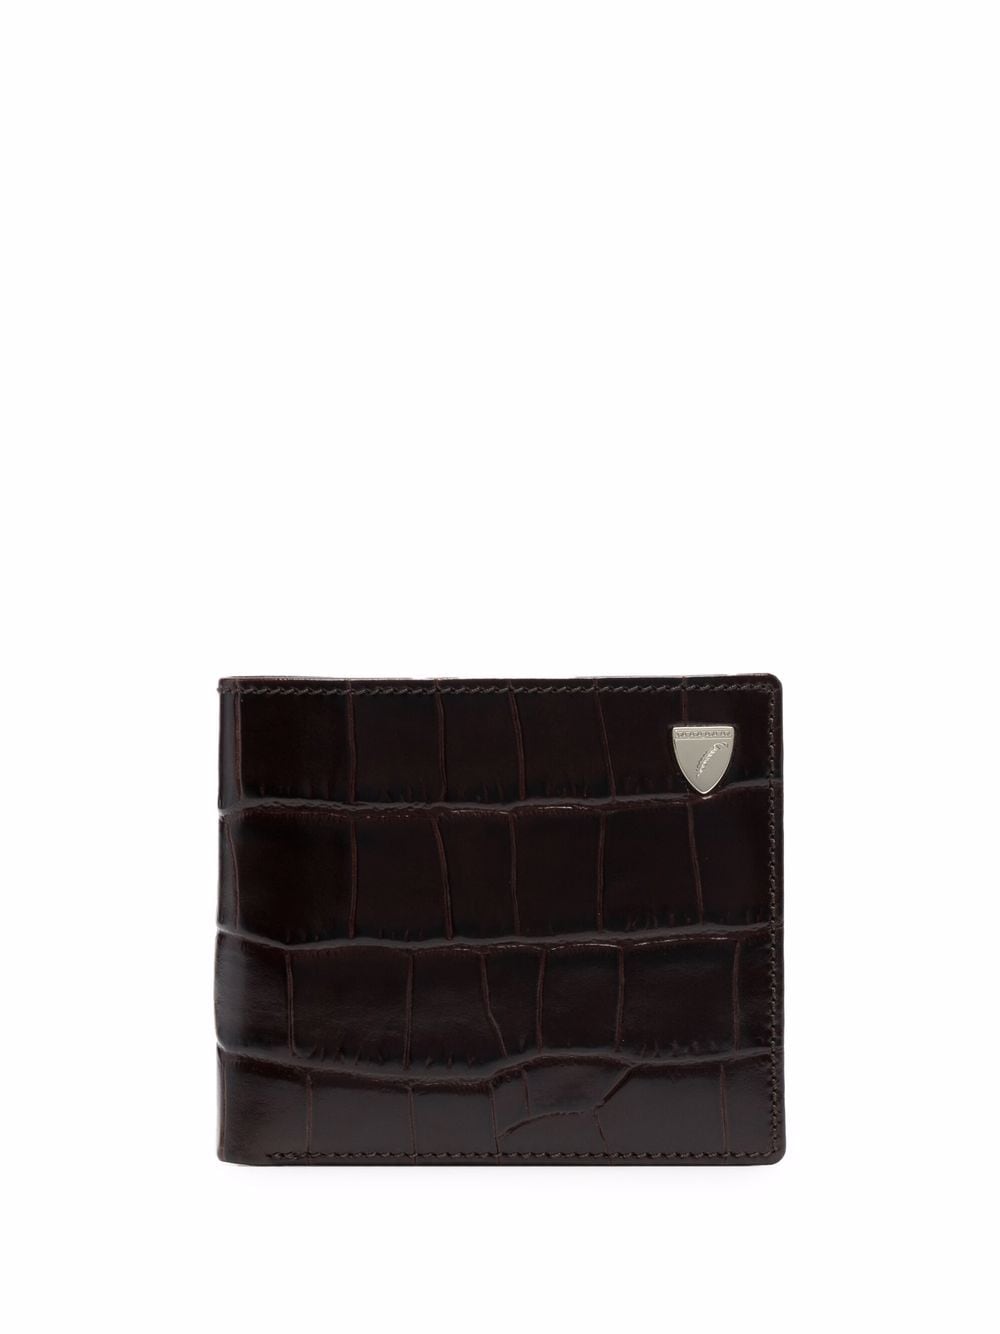 Aspinal Of London bi-fold leather wallet - Brown von Aspinal Of London